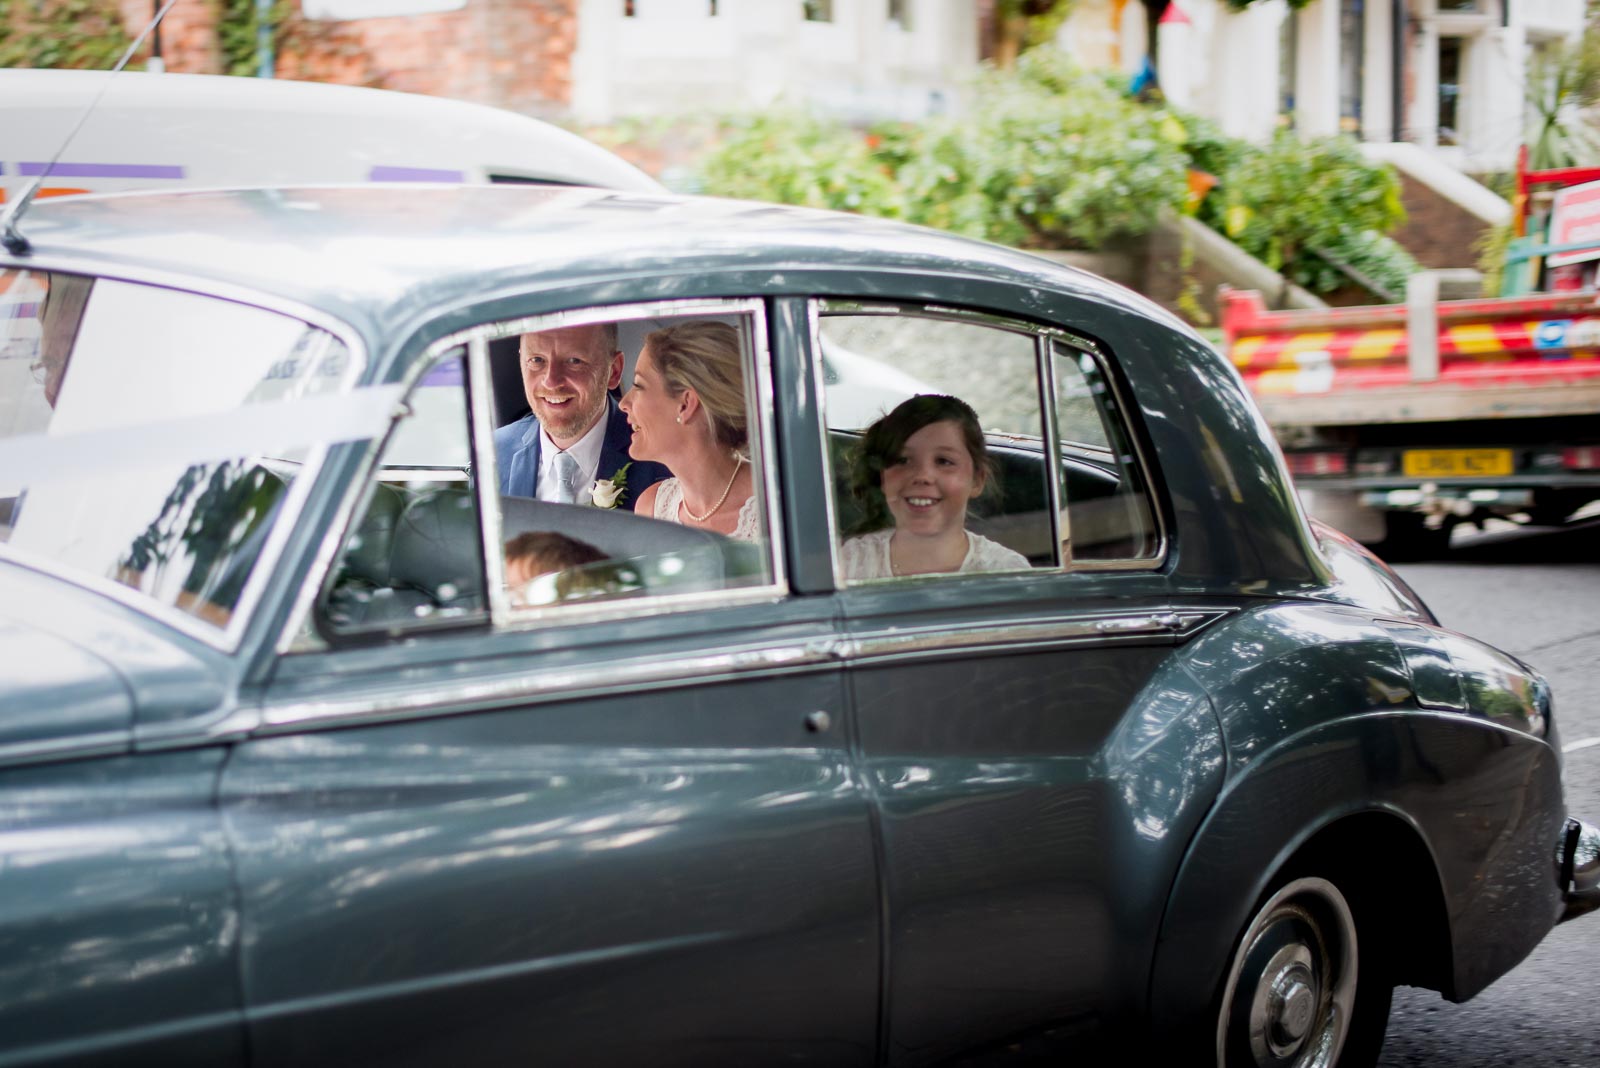 Emily and Richard depart from their wedding at Lewes Town Hall in a vintage Rolls Royce.